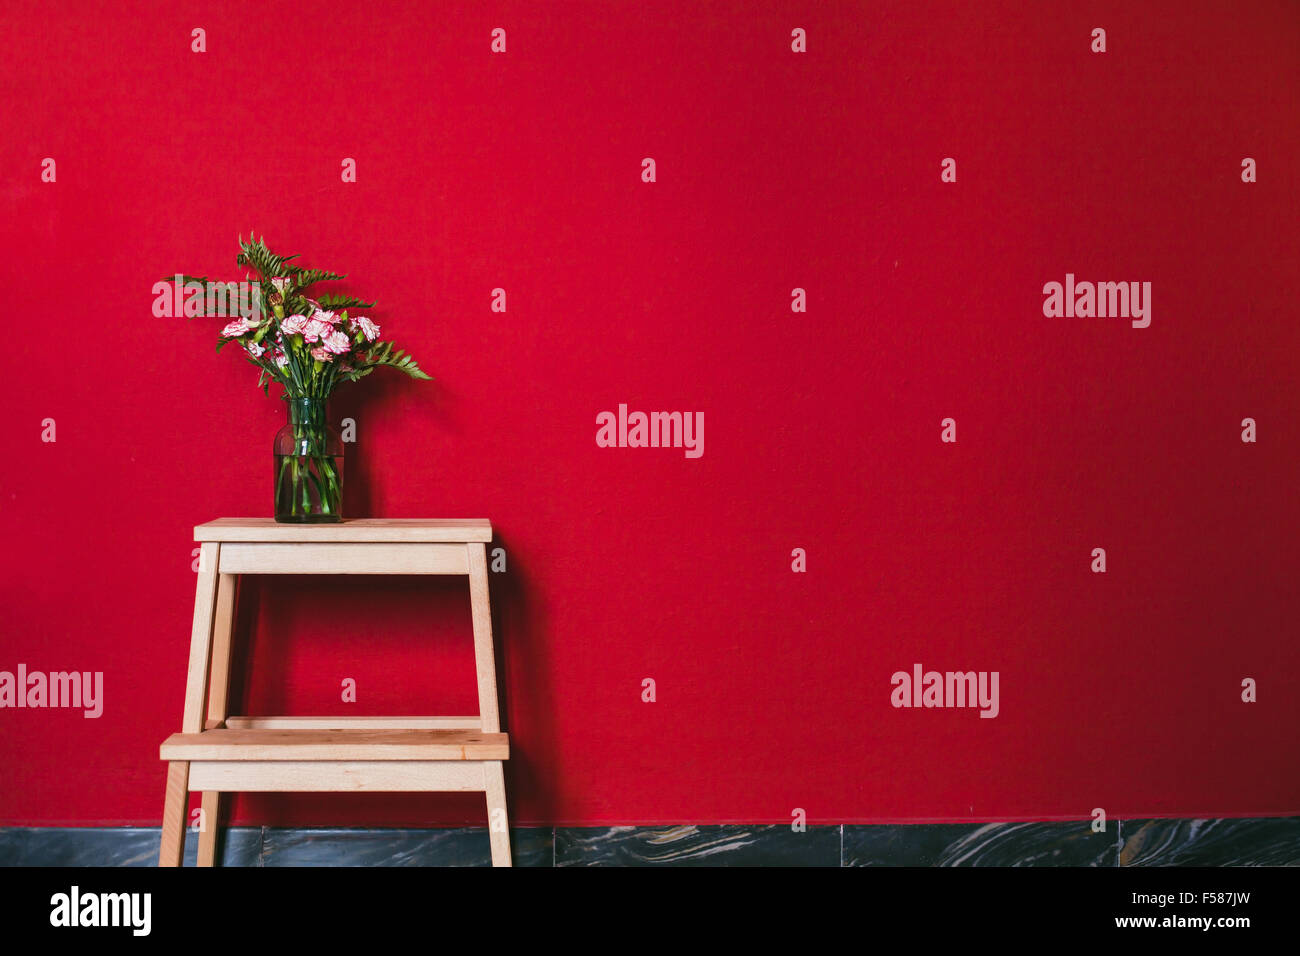 simple design of interior, flowers in vase on red wall background Stock Photo